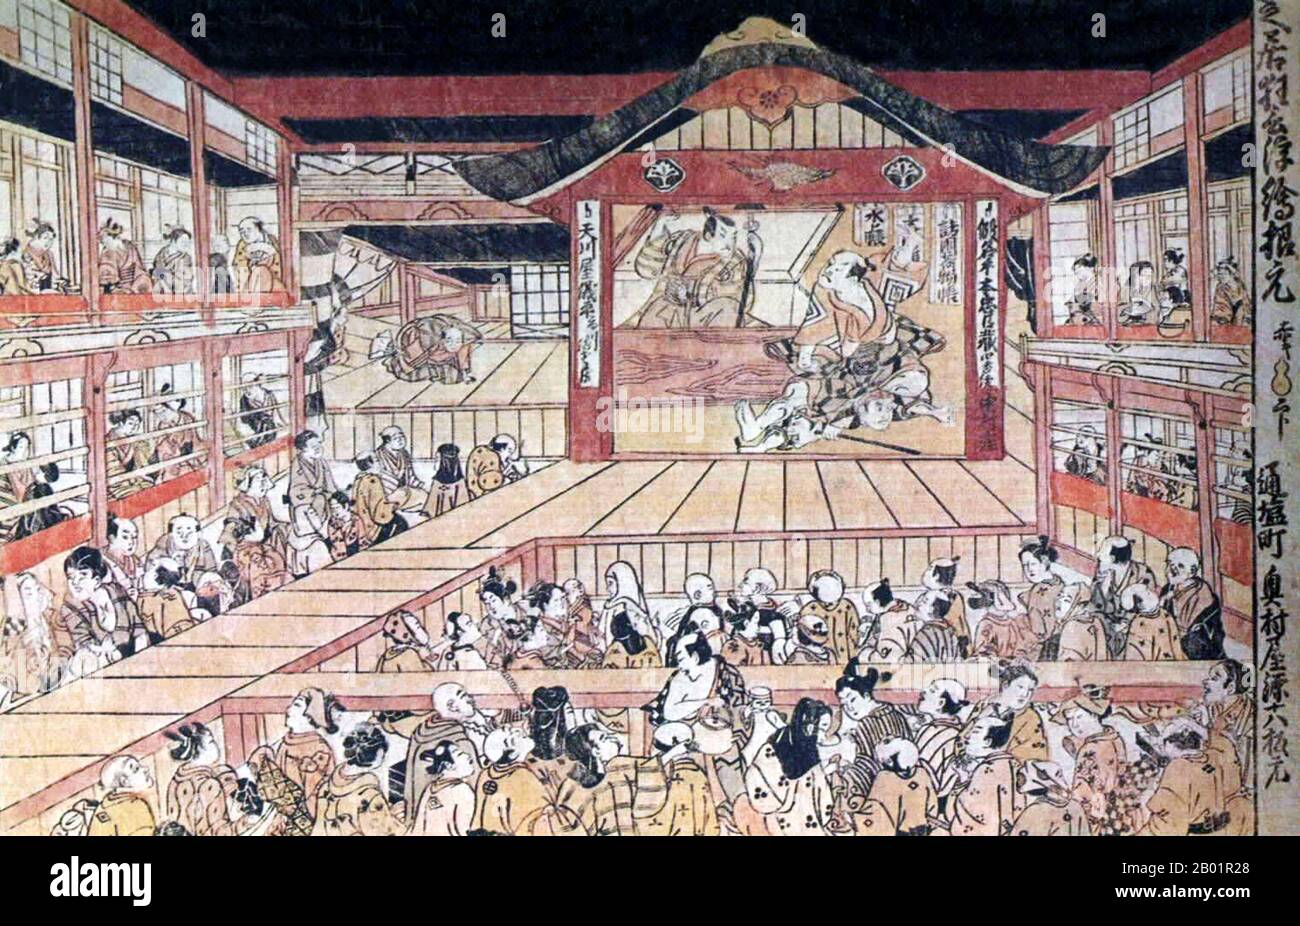 Japan: Scene from the play 'Kanadehon Chûshingura' at the Nakamura Theatre. Ukiyo-e woodblock print by Okumura Masanobu (1686 - 13 March 1764), 1749.  Kabuki is a classical Japanese dance-drama. Kabuki theatre is known for the stylisation of its drama and for the elaborate make-up worn by some of its performers.  The individual kanji characters, from left to right, mean sing (歌), dance (舞), and skill (伎). Kabuki is therefore sometimes translated as the art of 'singing and dancing'. These are, however, ateji characters which do not reflect actual etymology. Stock Photo